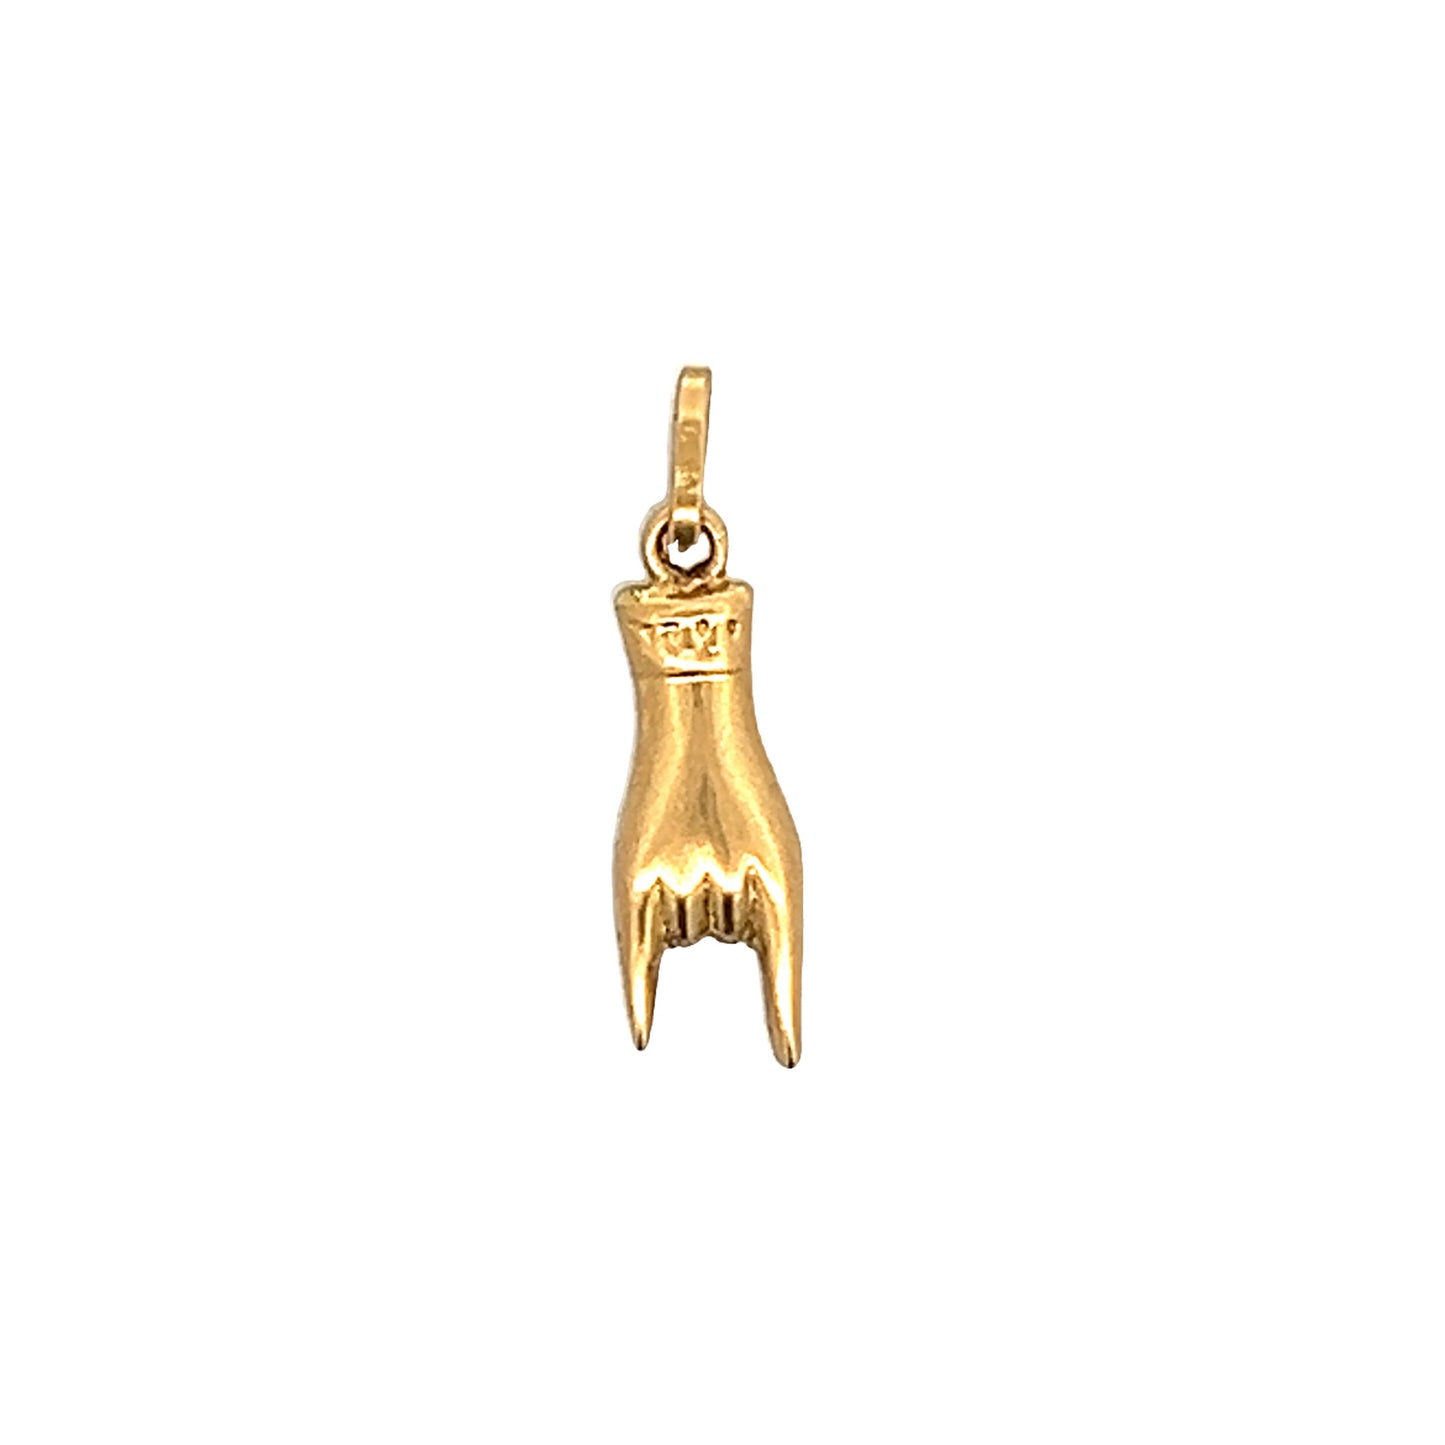 Vintage Horned Hands Charm Pendant in 14k Yellow Gold